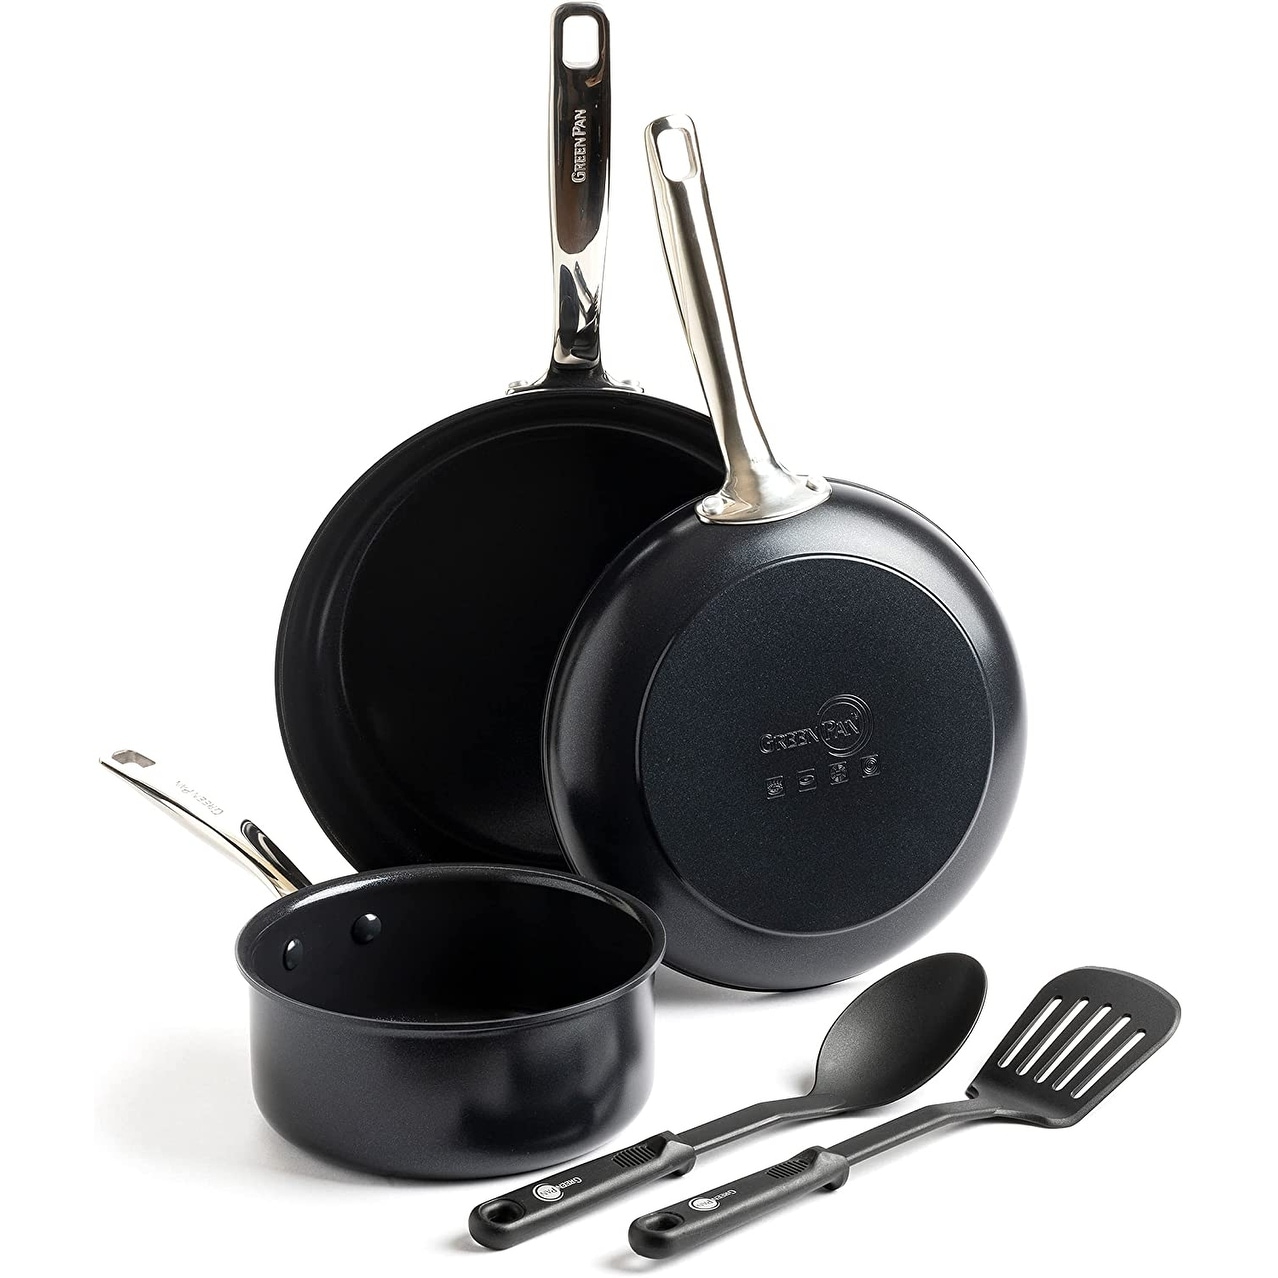 https://ak1.ostkcdn.com/images/products/is/images/direct/017a264bf8ea930bb184b4fad72a9f6e28a0c3be/GreenPan-Chatham-Black-Prime-Midnight-Hard-Anodized-Healthy-Ceramic-Nonstick-11-Piece-Cookware-Pots-and-Pans-Set.jpg